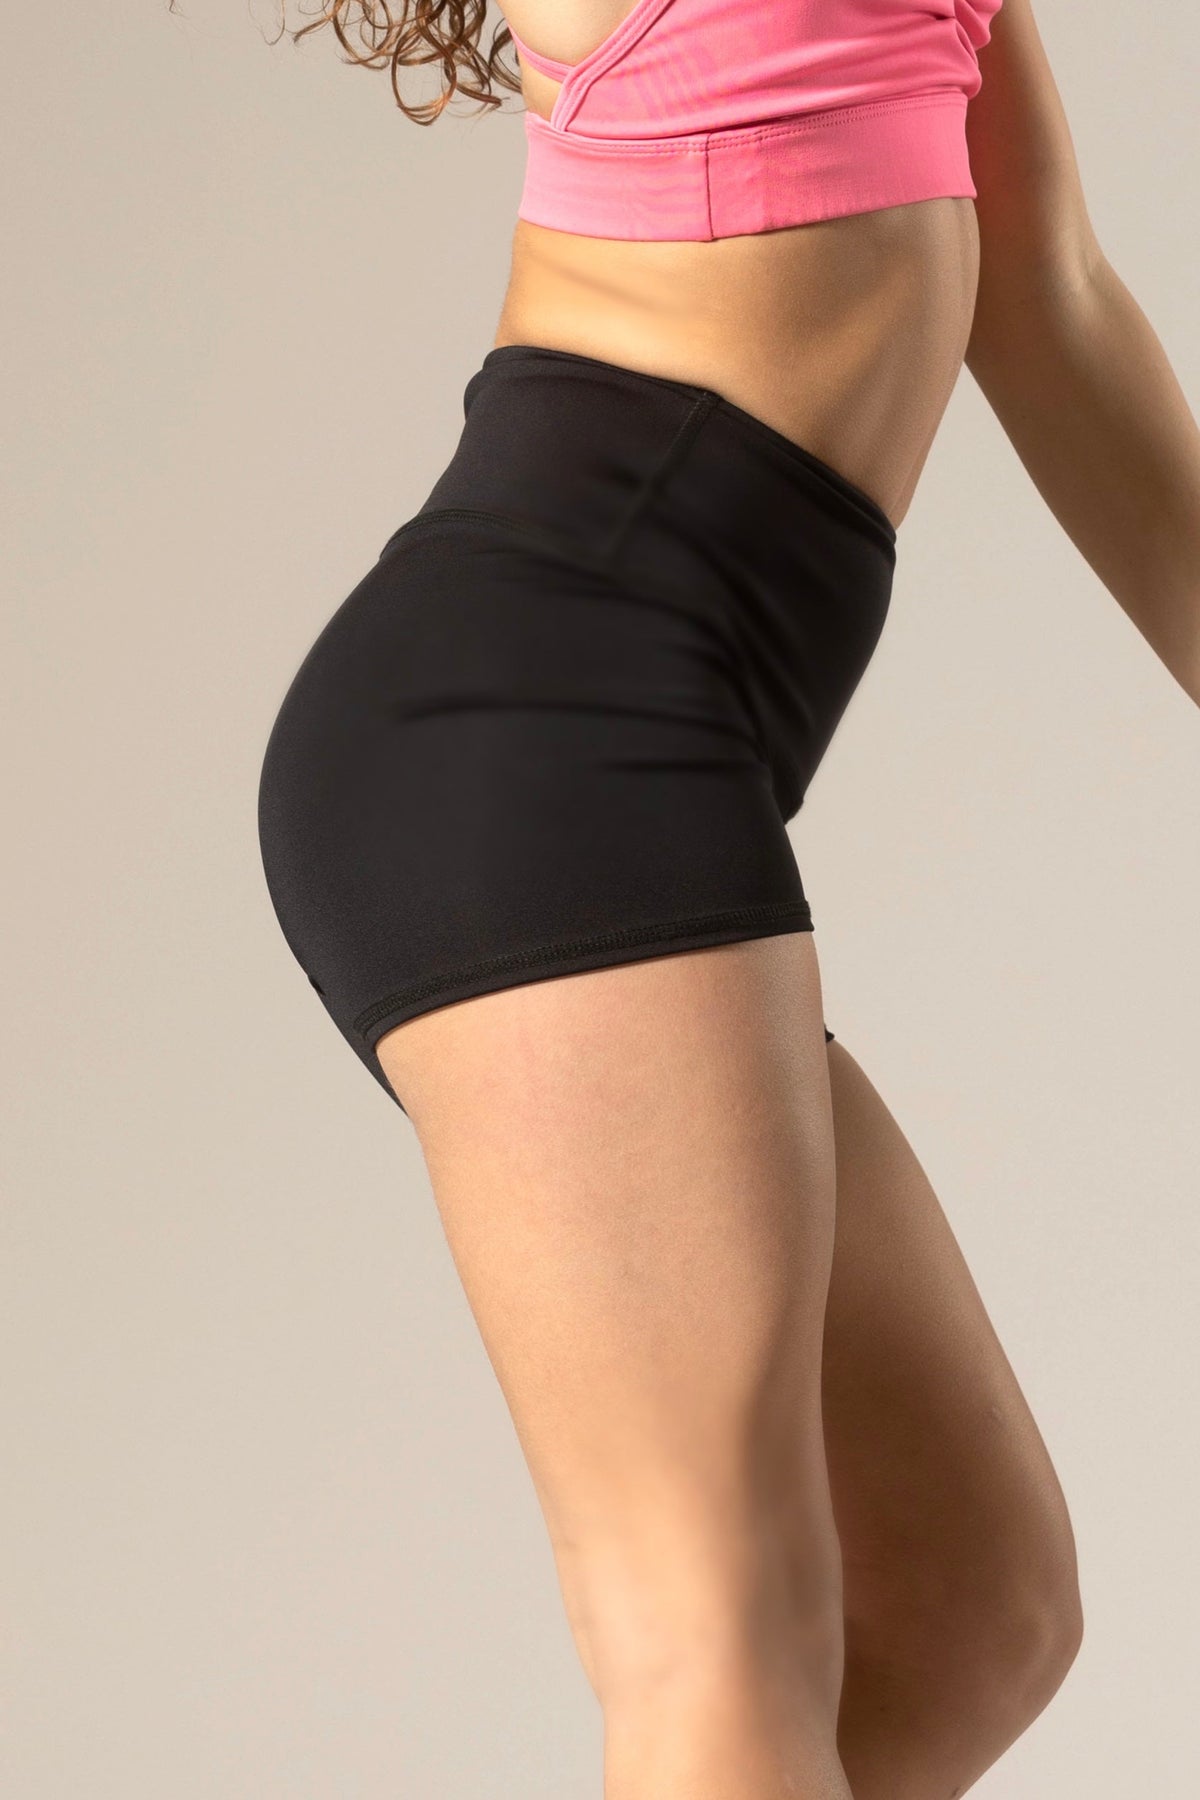 Tiger Friday Online Shop for Outlet Shorties Bootie Shorts - Black Dancewear - View : 2